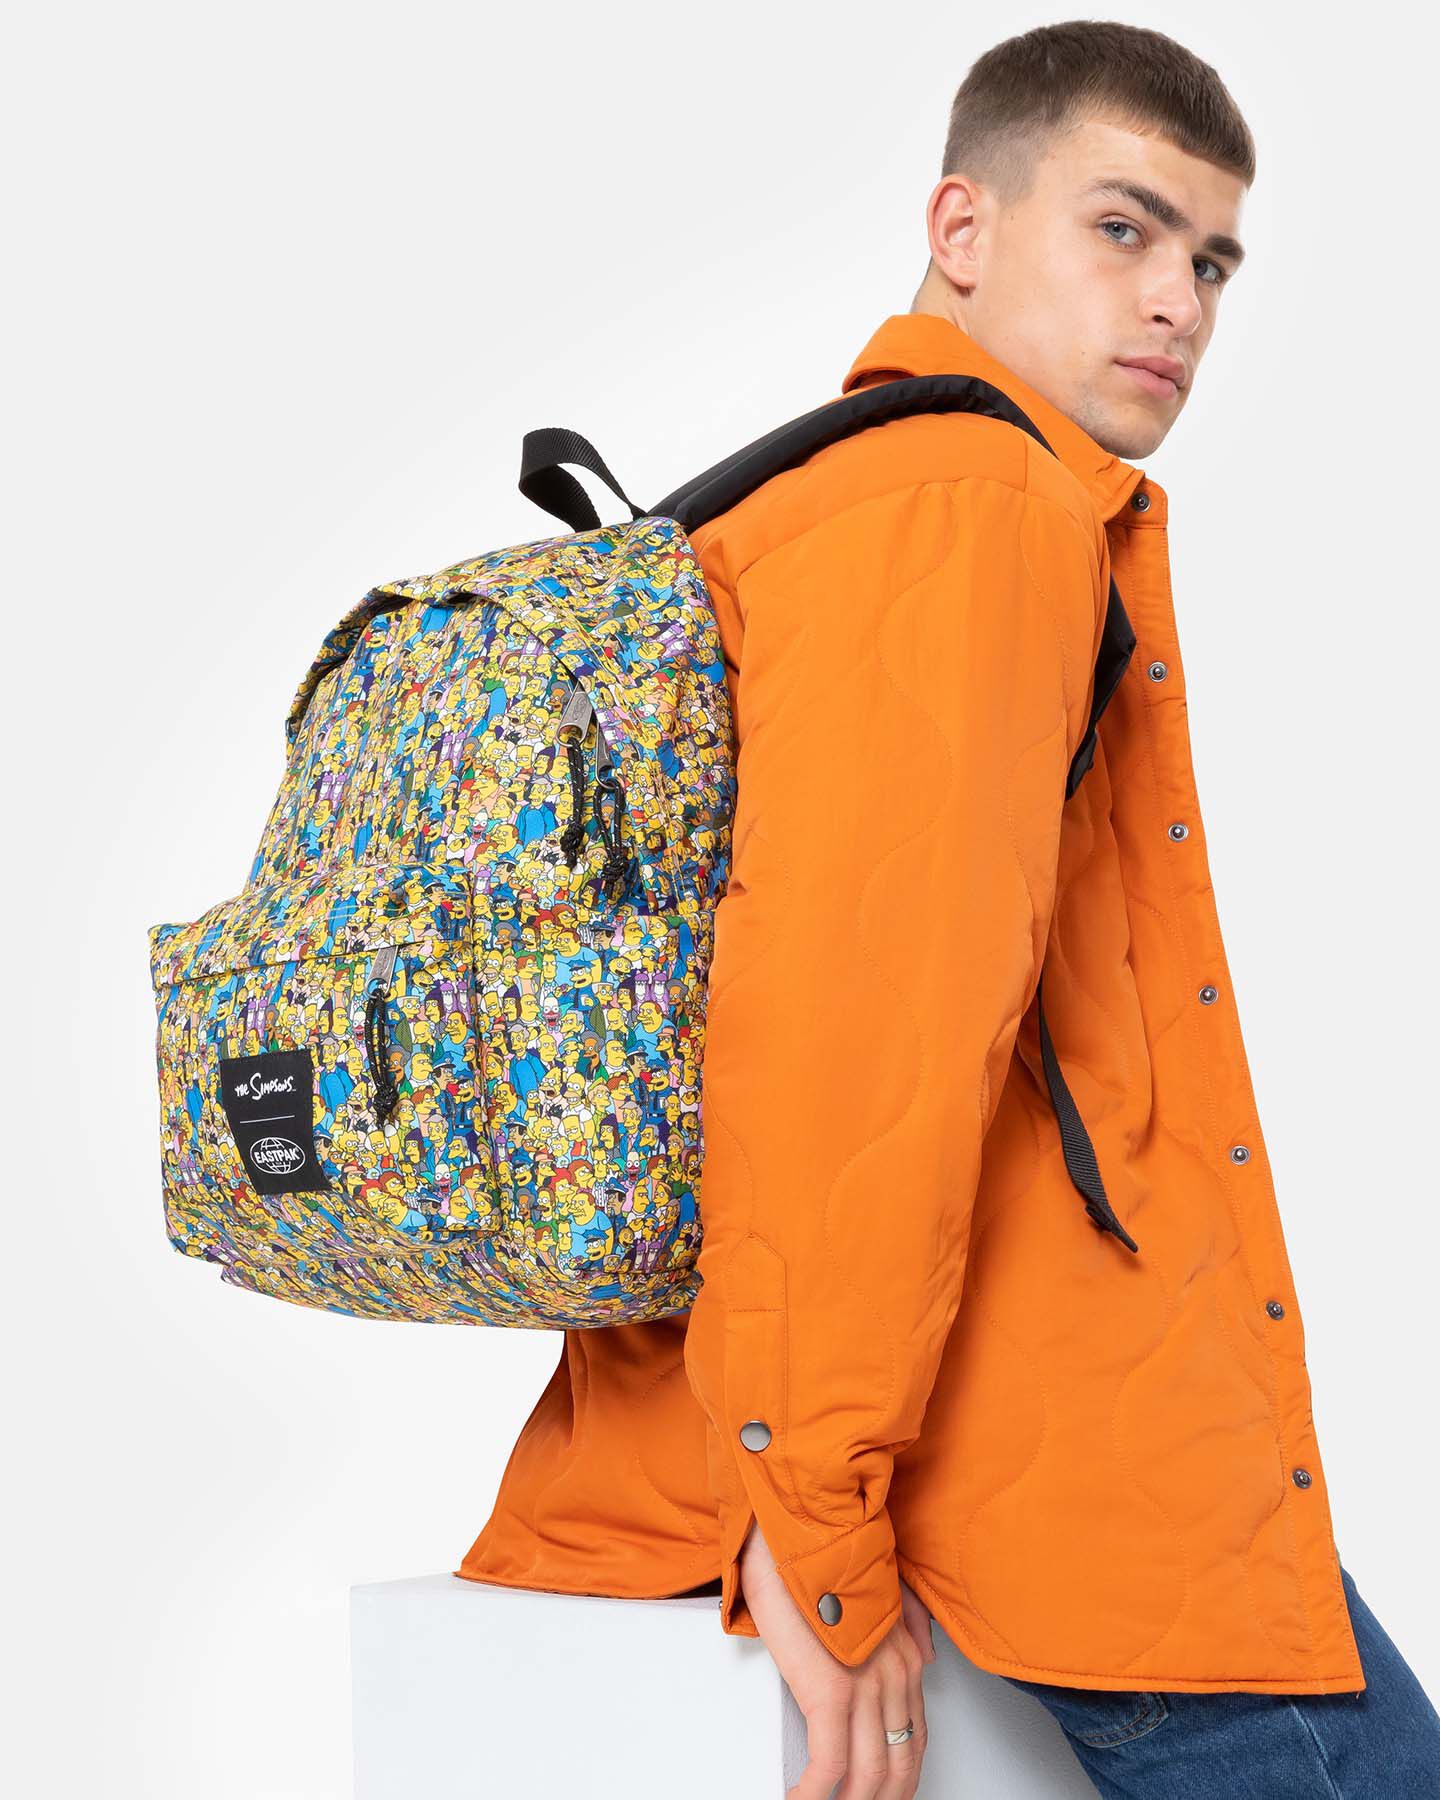  Zaino EASTPAK PADDED THE SIMPSONS  S5550522|7A2|OS scatto 1